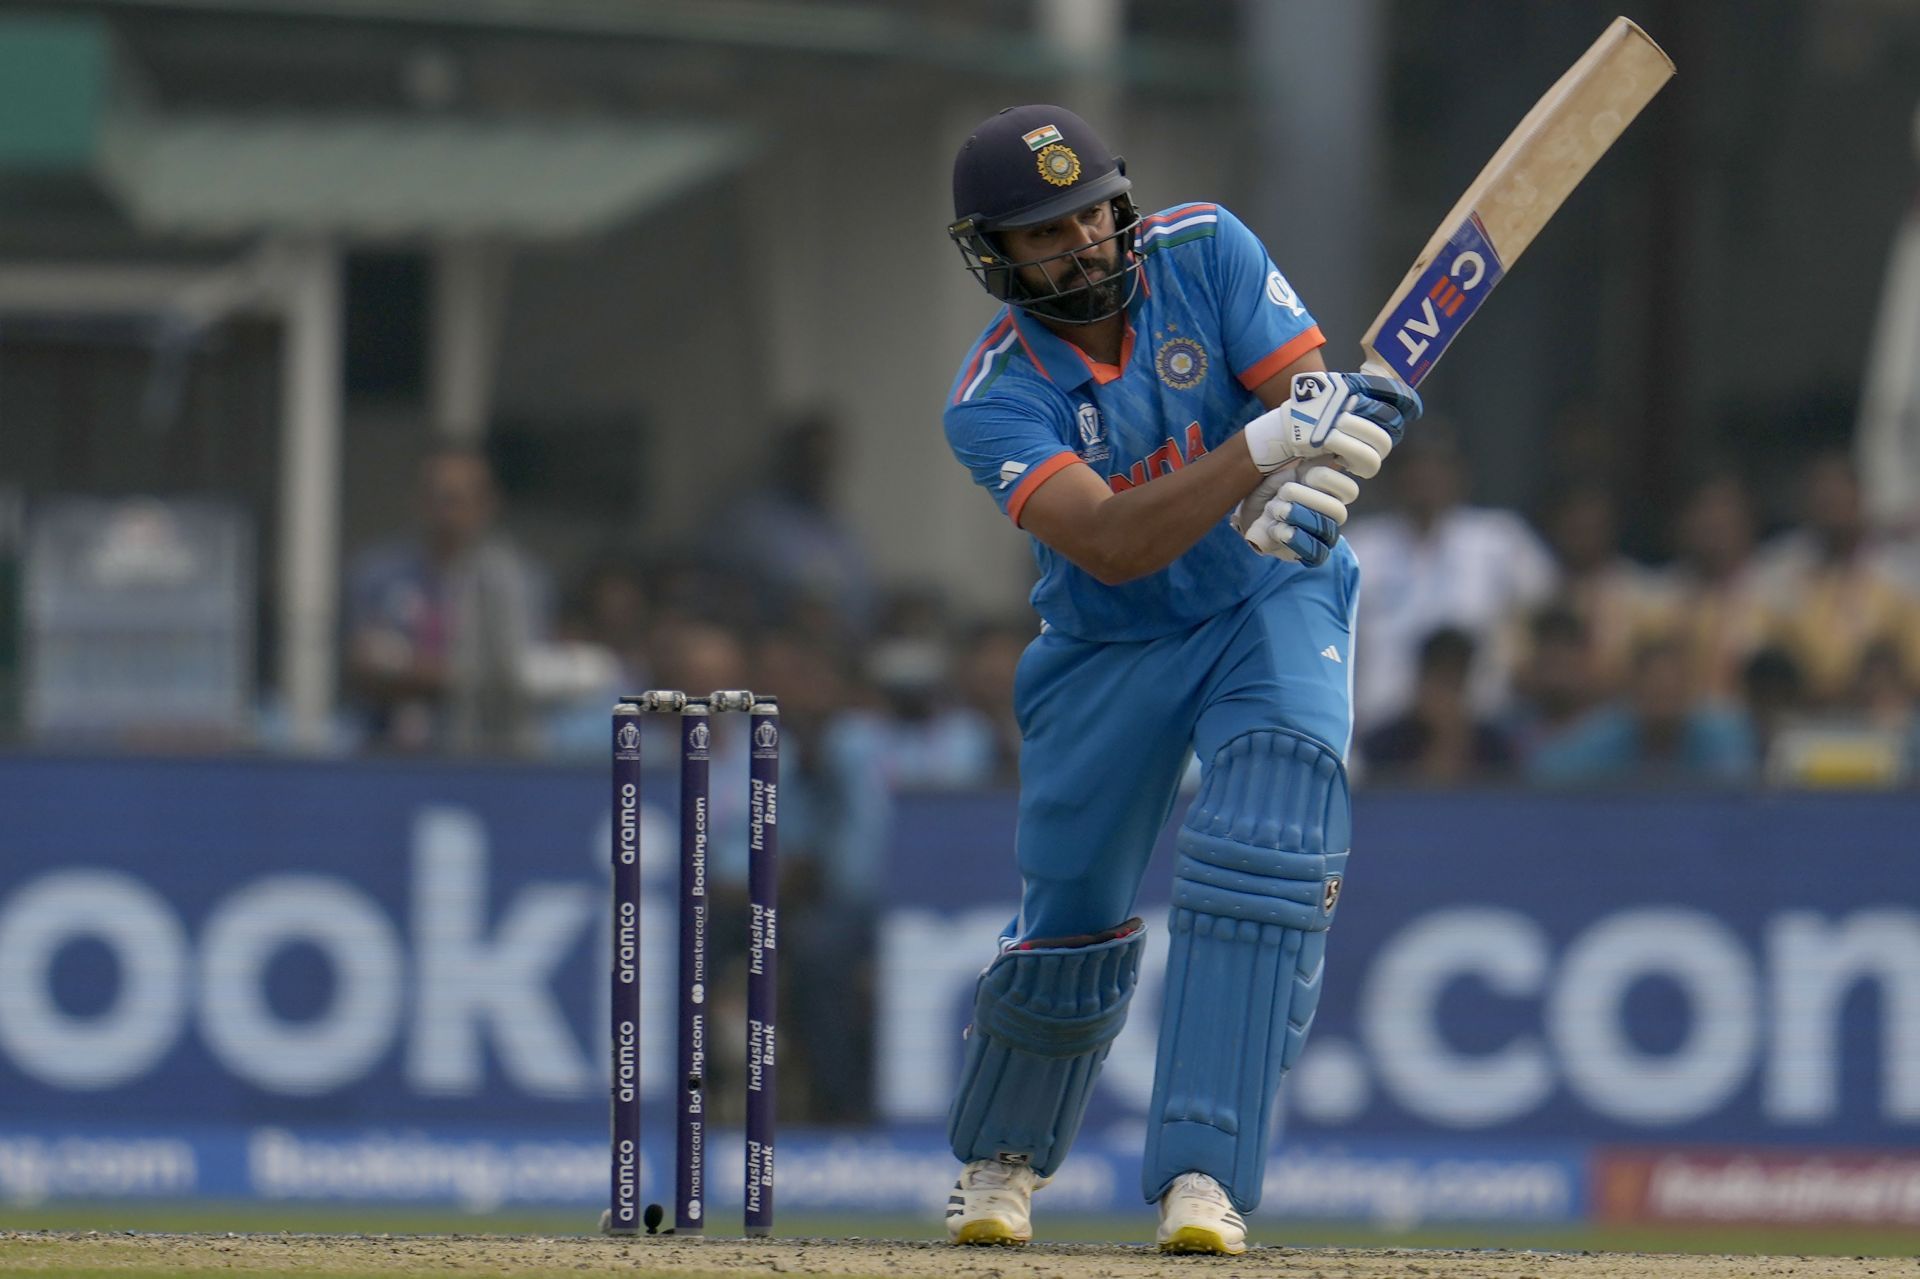 Rohit Sharma struck 58 fours and 24 sixes in the league phase. [P/C: AP]